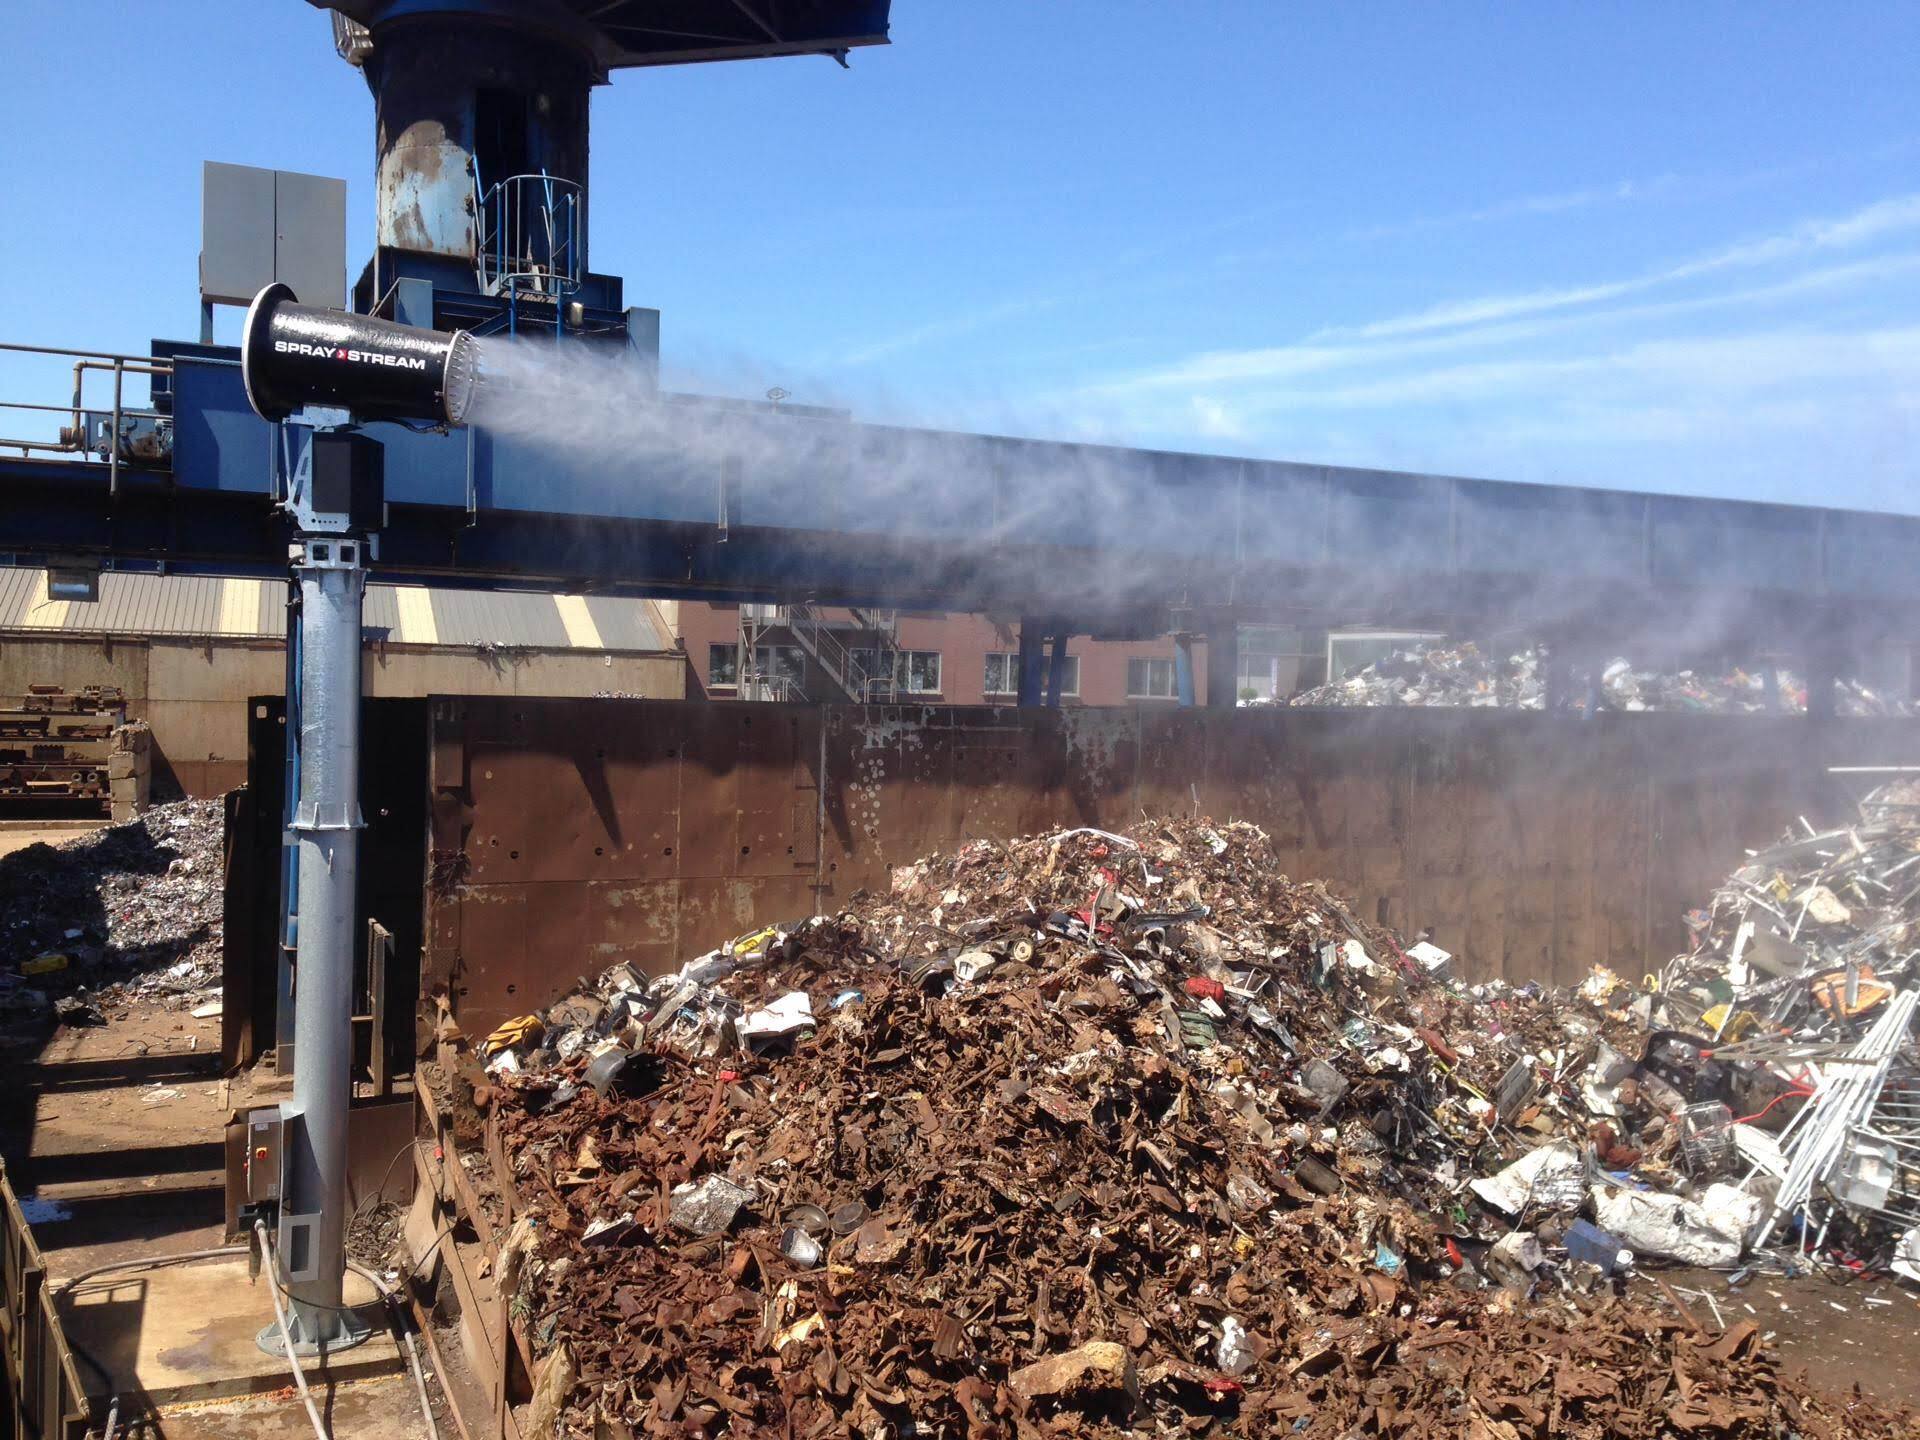 Galloo recycling cannon S7 5 tower dust 04